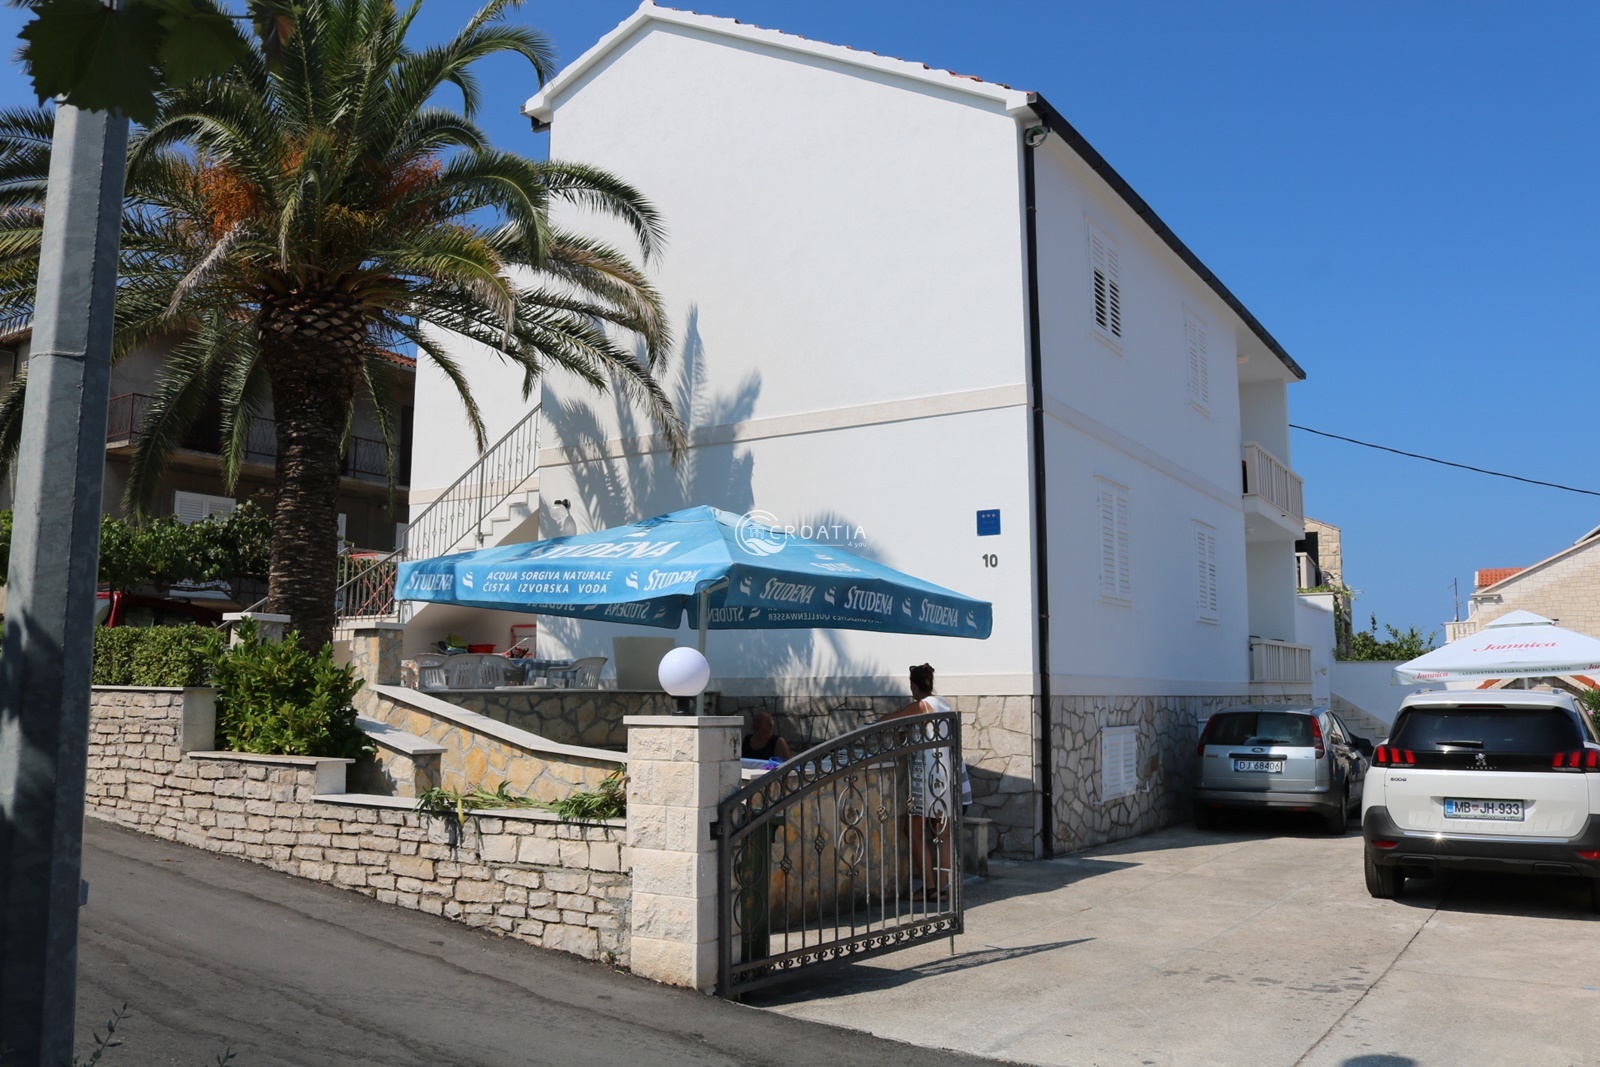 House with apartments in Supetar on island Brač